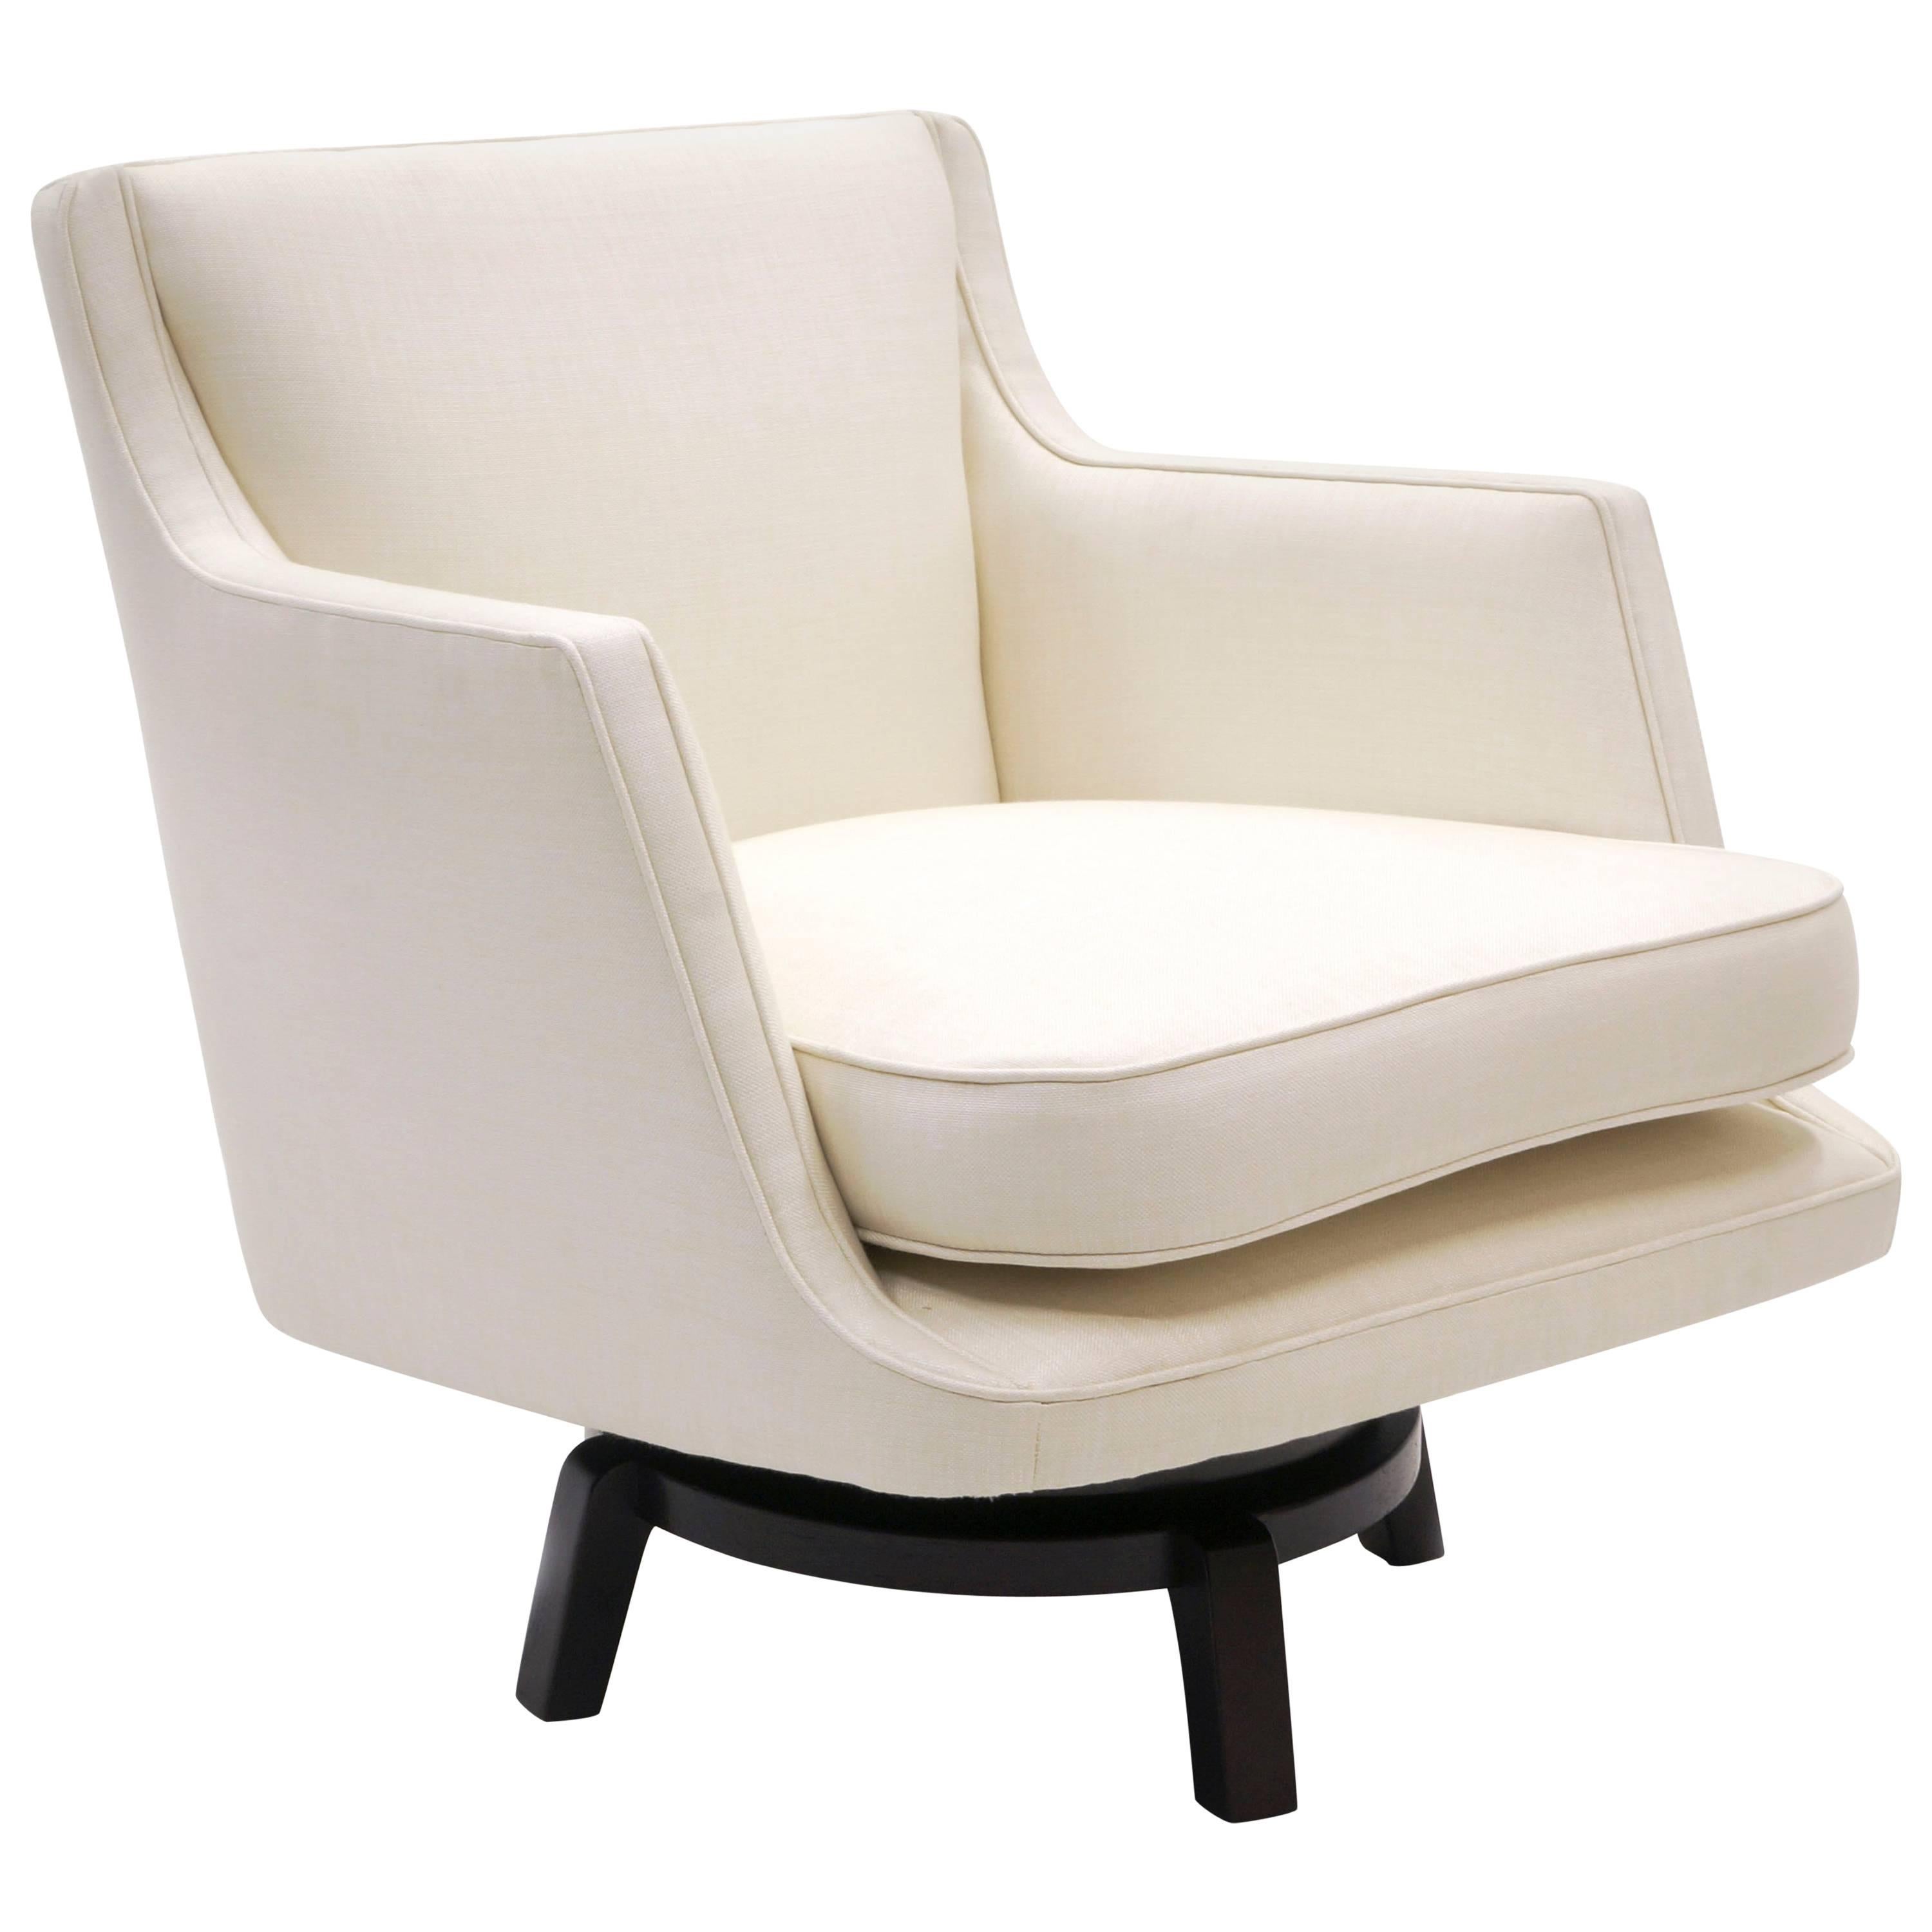 Swivel Lounge Chair, Edward Wormley for Dunbar, Almost White, Expertly Restored For Sale